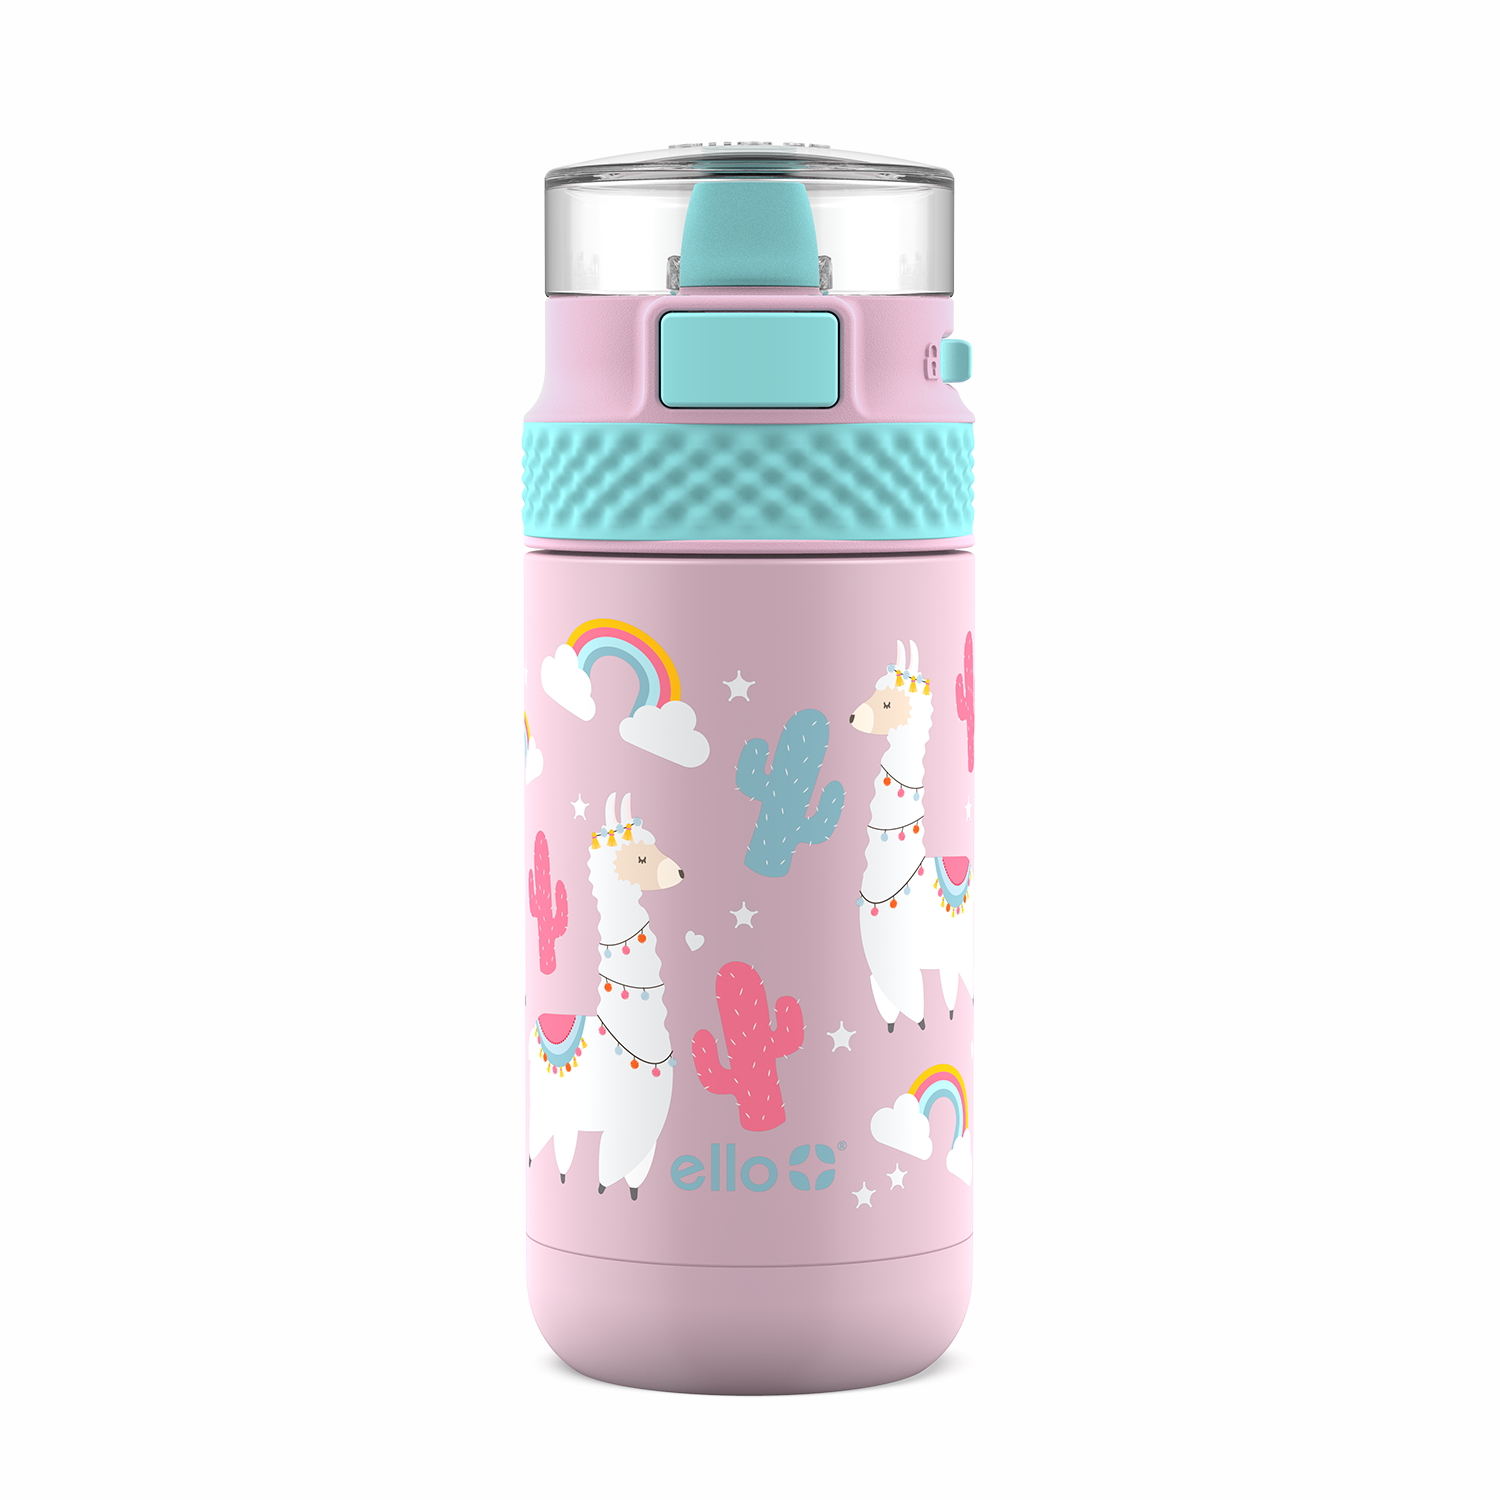 Emma 14oz Vacuum Insulated Stainless Steel Kids Water Bottle Pink